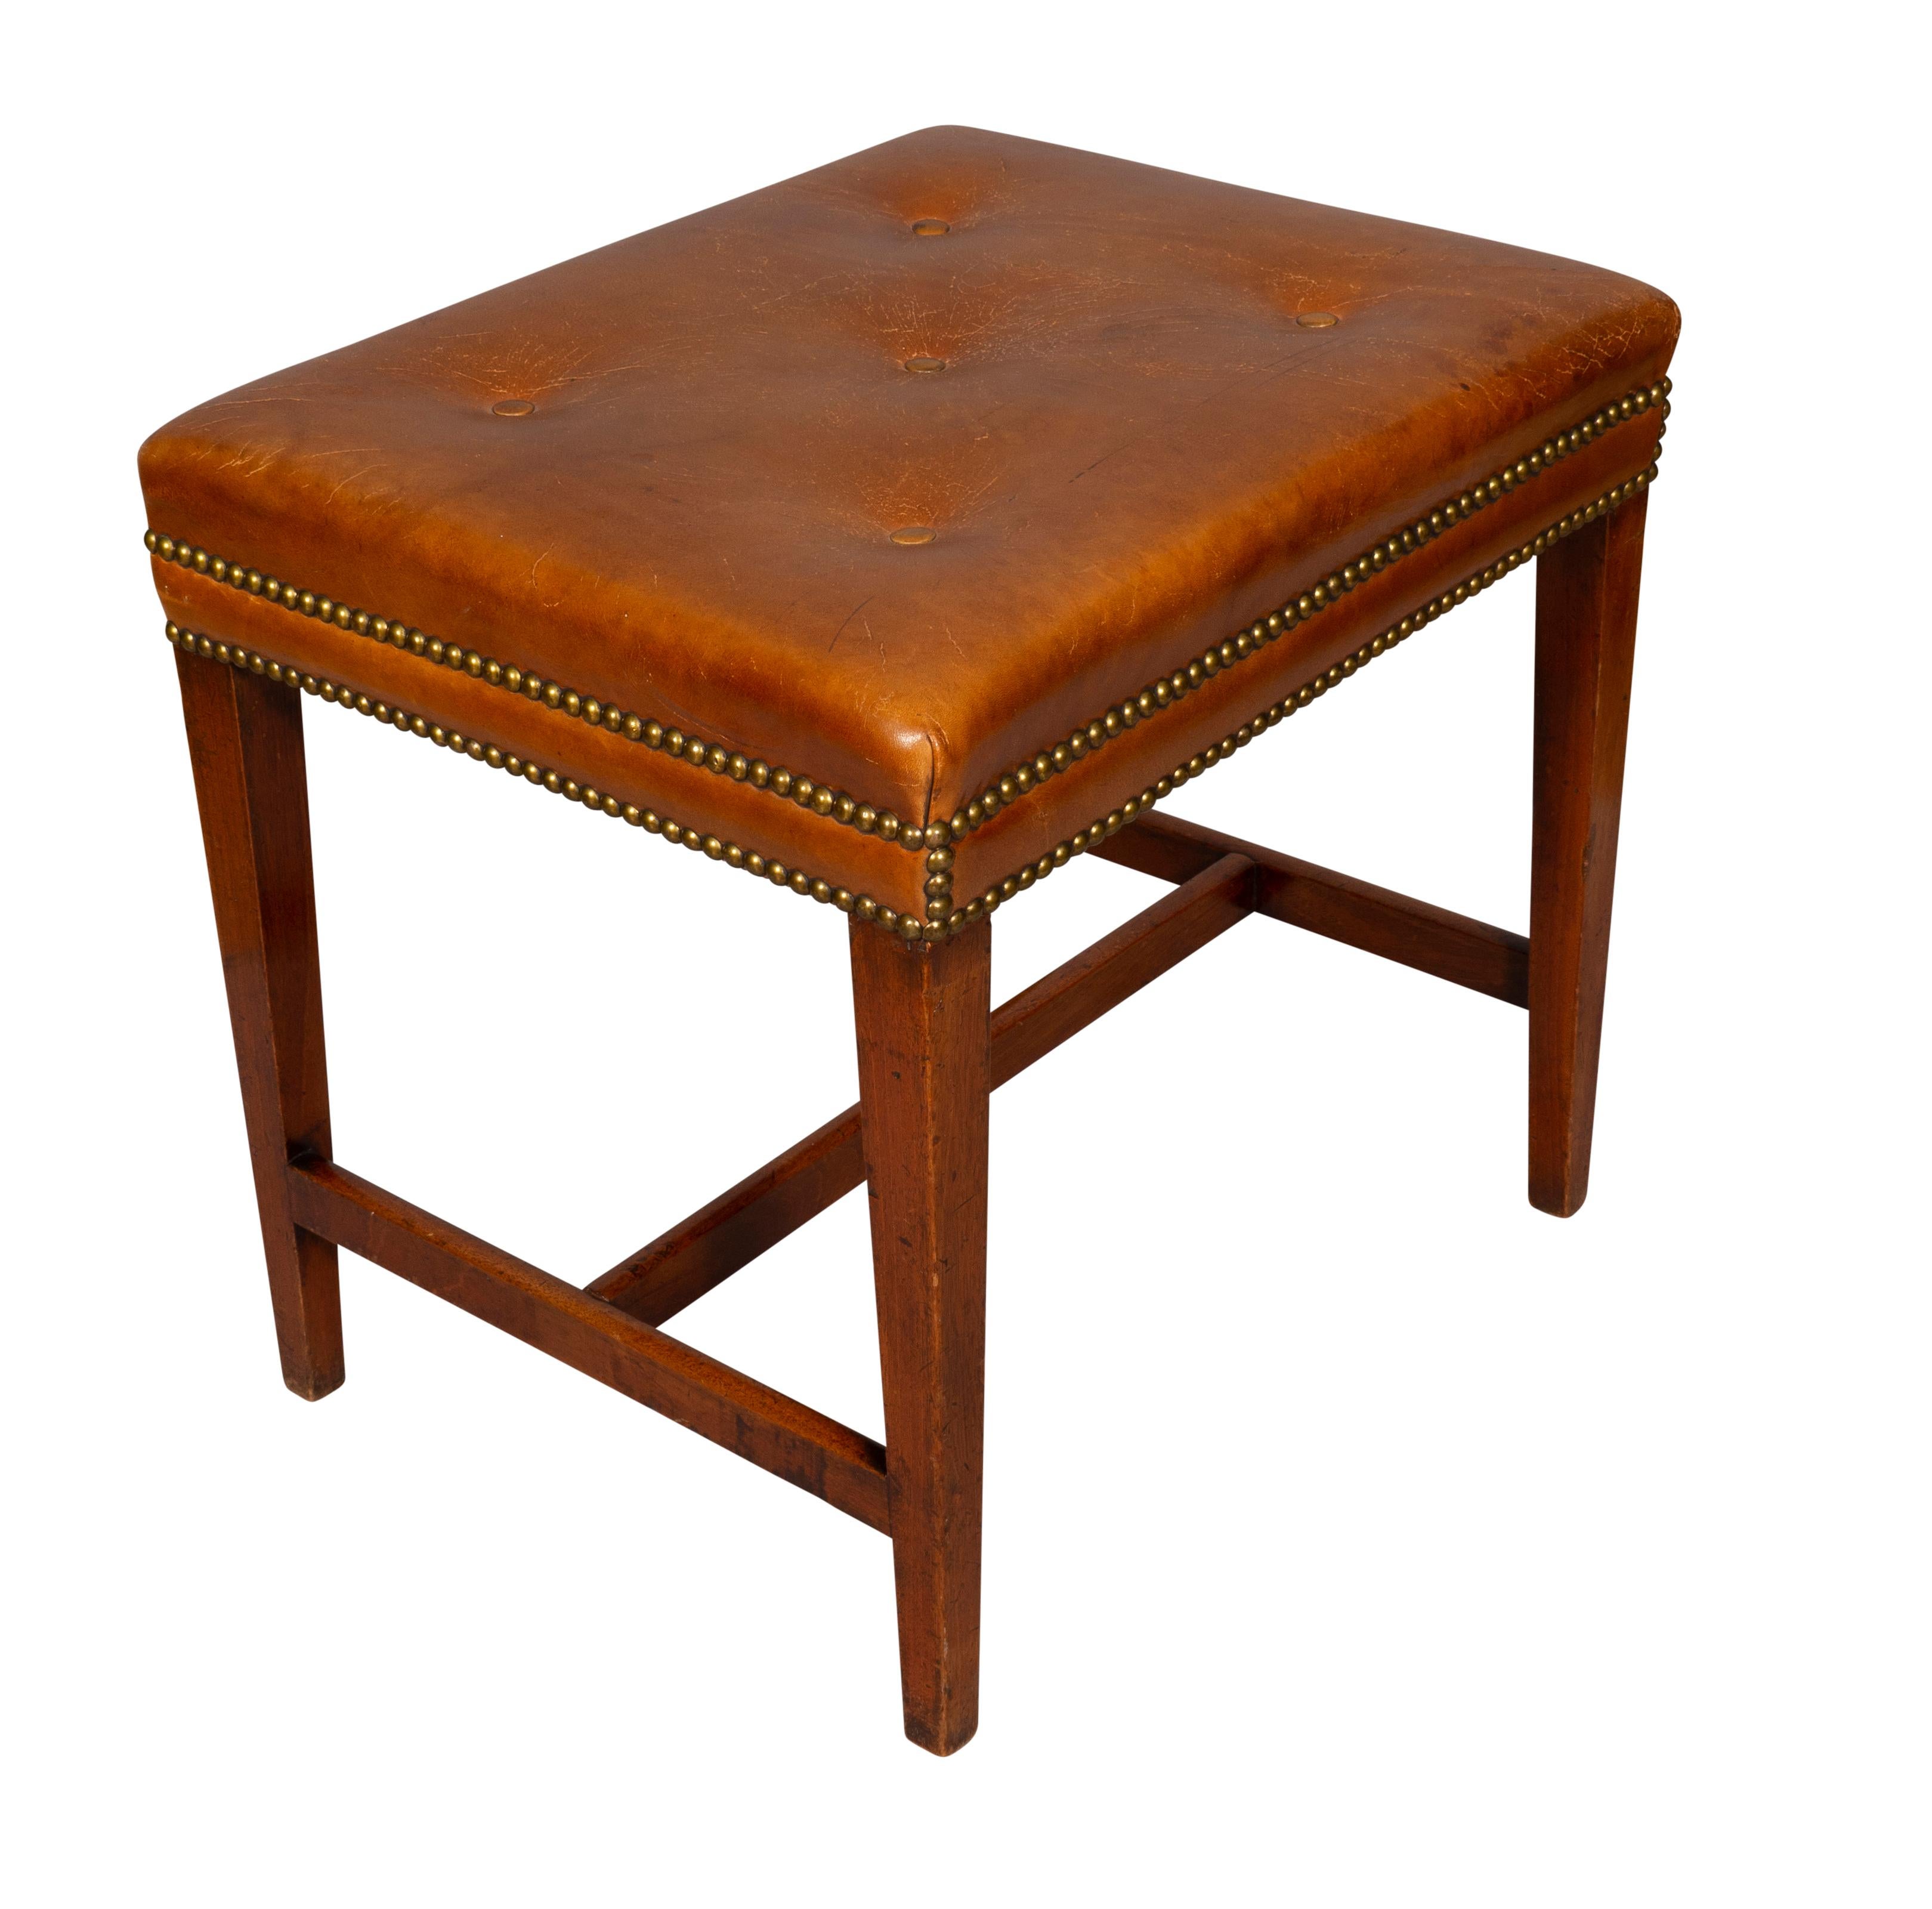 Rectangular top with brown leather and brass tacking raised on square tapered legs with H form stretchers. Estate of Douglas S. Kramer. Art collector and TV producer.